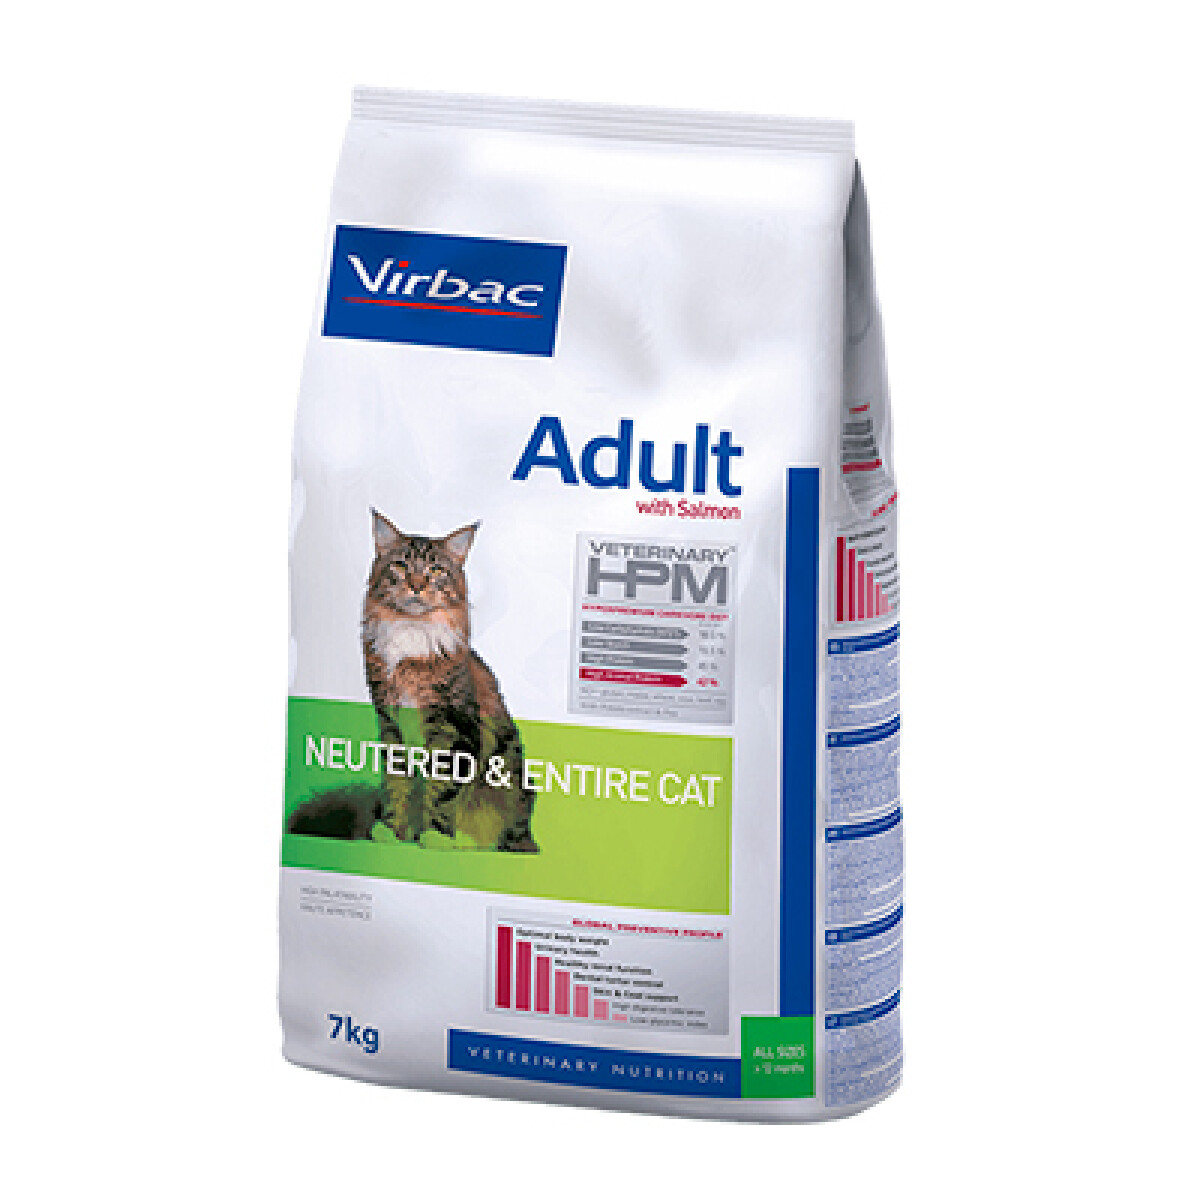 VIRBAC CAT ADULT WITH SALMON NEUTERED & ENTIRE 7 KG - Unica 